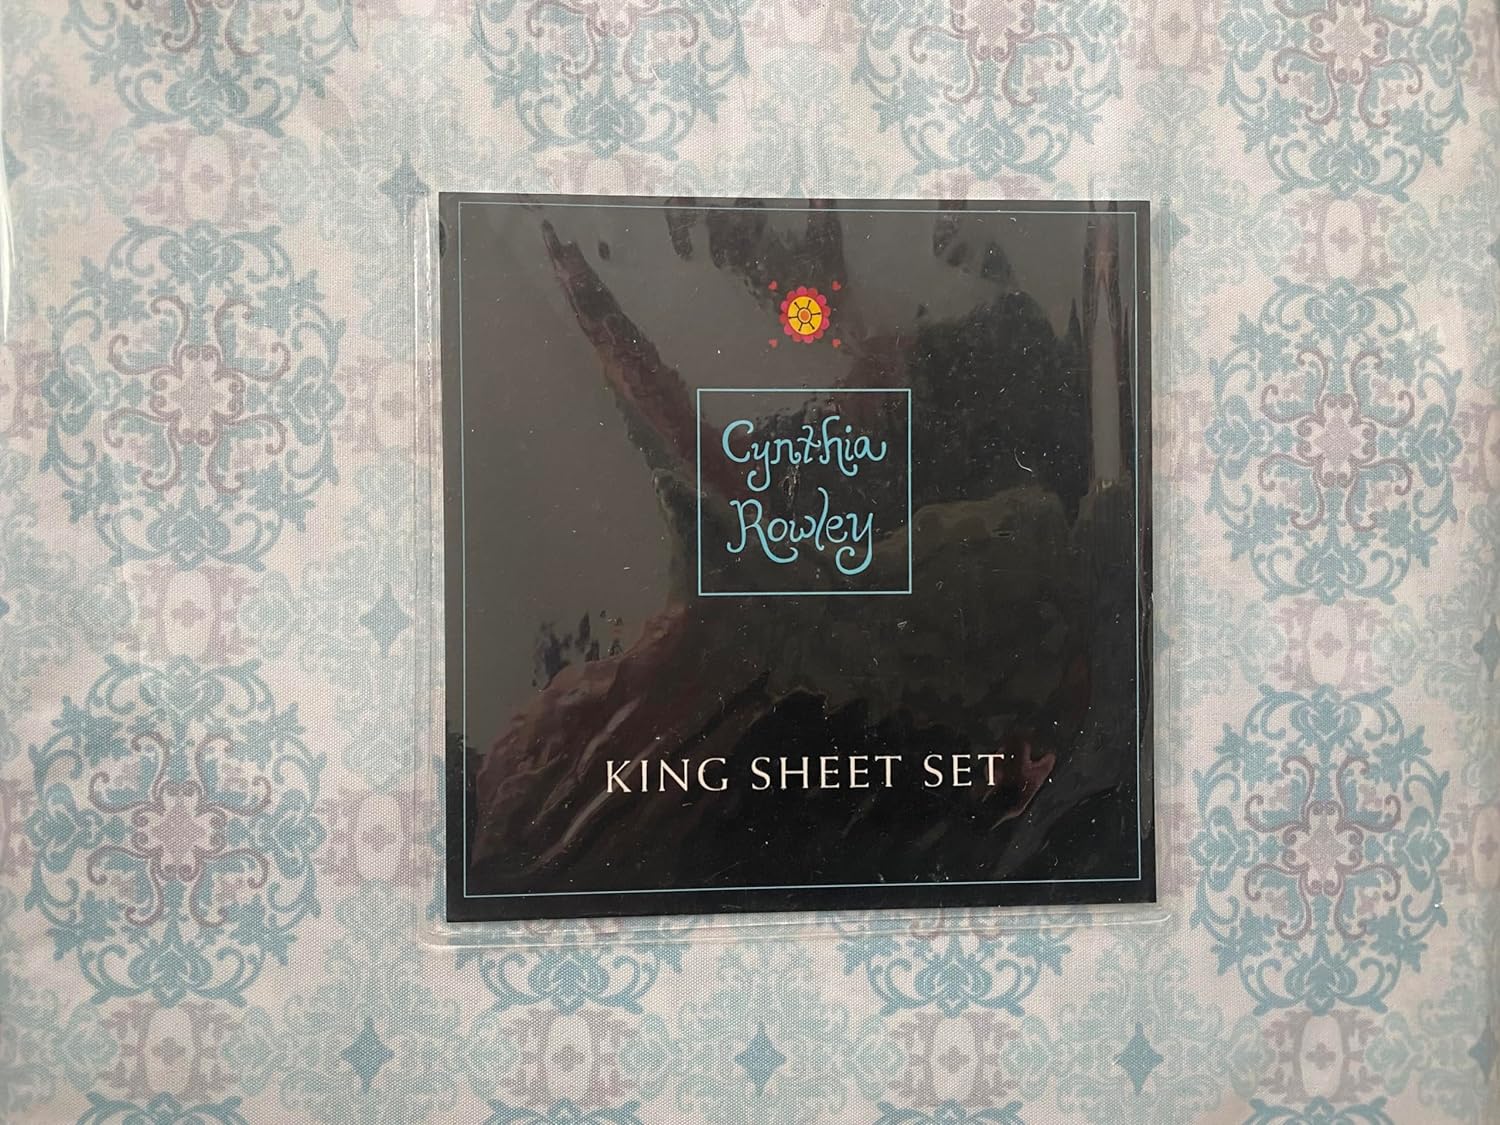 Cynthia Rowley 4 Piece King Sheet Set. Blue And Gray Medallions. 100% Polyester Microfiber. - image 3 of 4